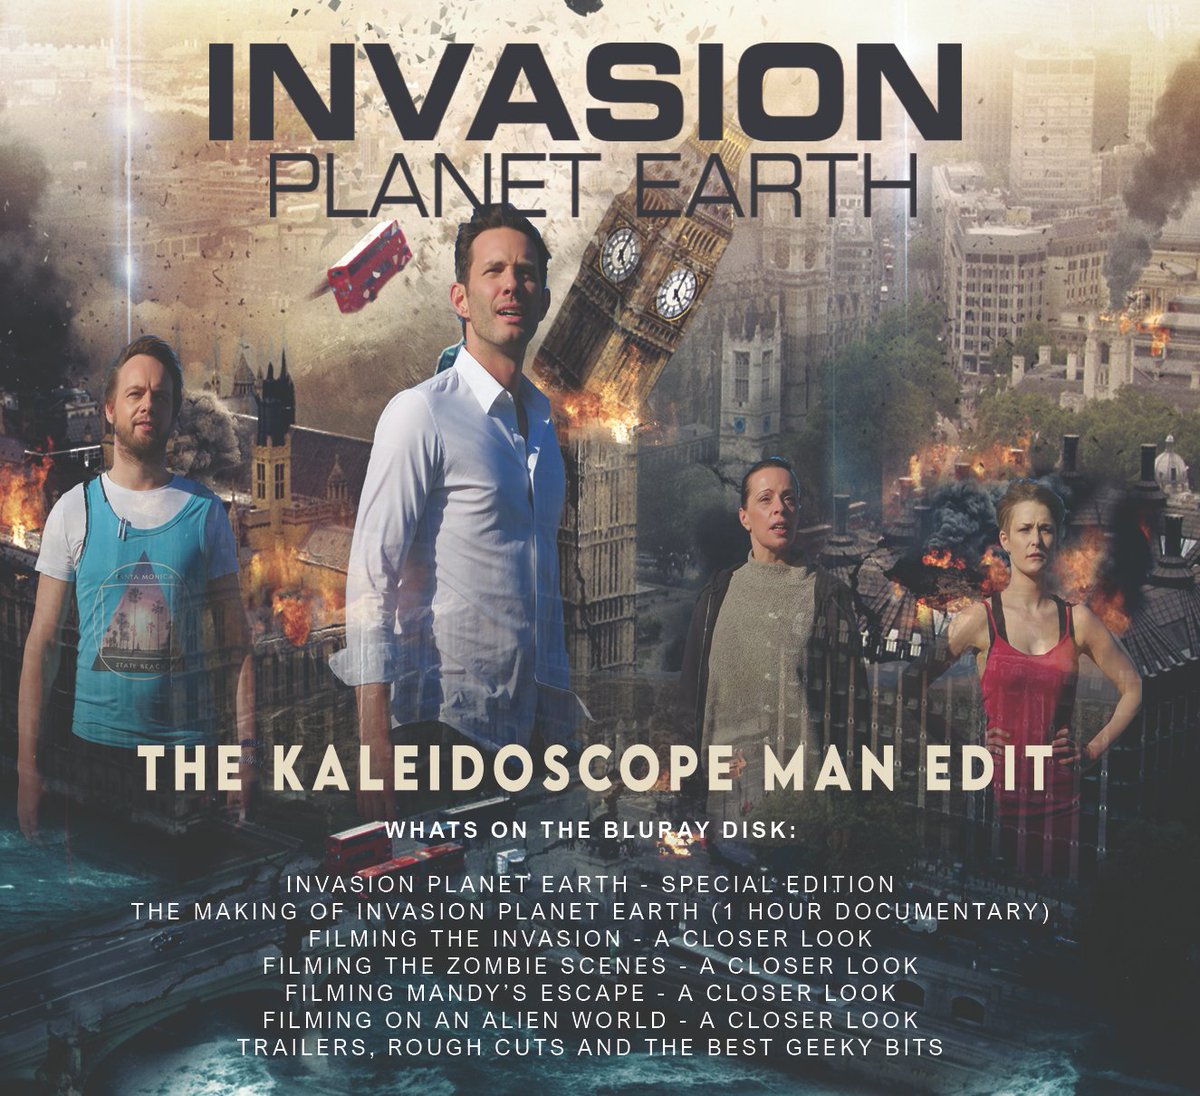 Thank you everyone who has ordered the #BluRay special edition of, Invasion Planet Earth. It can only be purchased over the next 45 days as part of our #crowdfunding campaign. You'll find it super-inspiring! #SupportIndieFilm Get a copy here: igg.me/at/OIW4/x/3950…